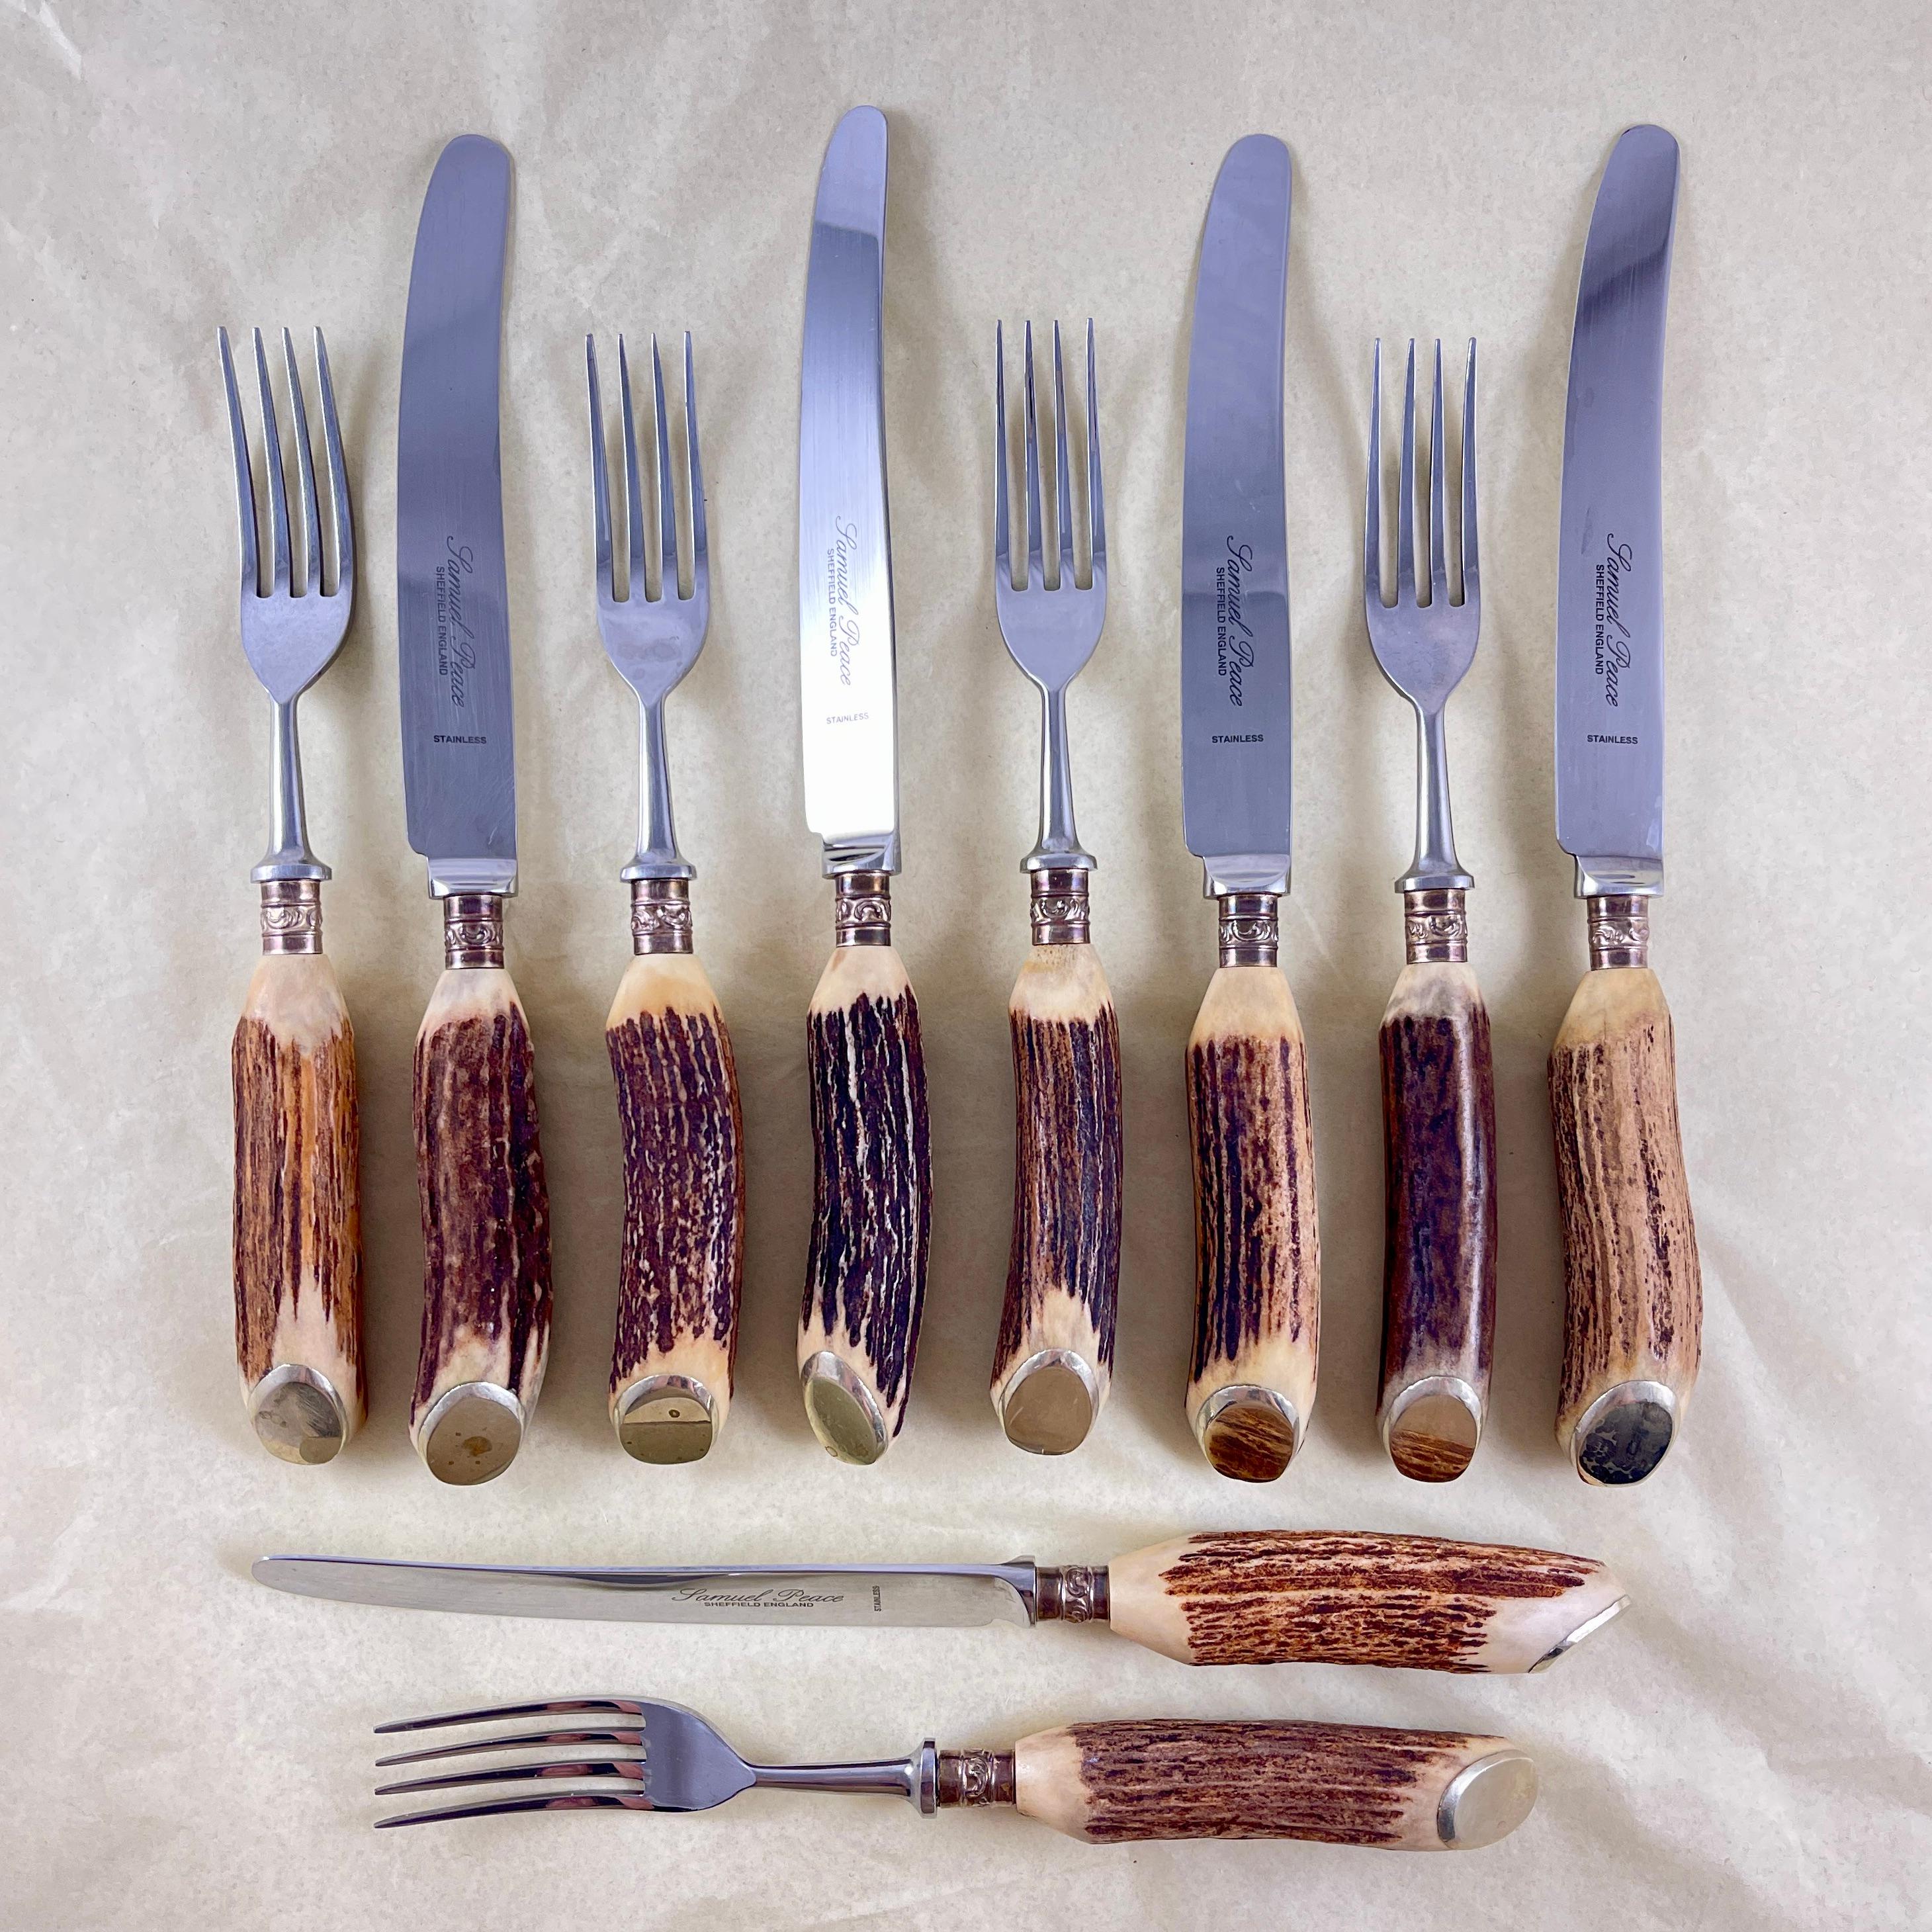 An English stag antler handled flatware set, made by Samuel Peace in Sheffield, England, circa 1895-1925.

Five each dinner sized fork and knives made of heavy, substantial quality stainless steel utensils set into naturally shed antler handles with